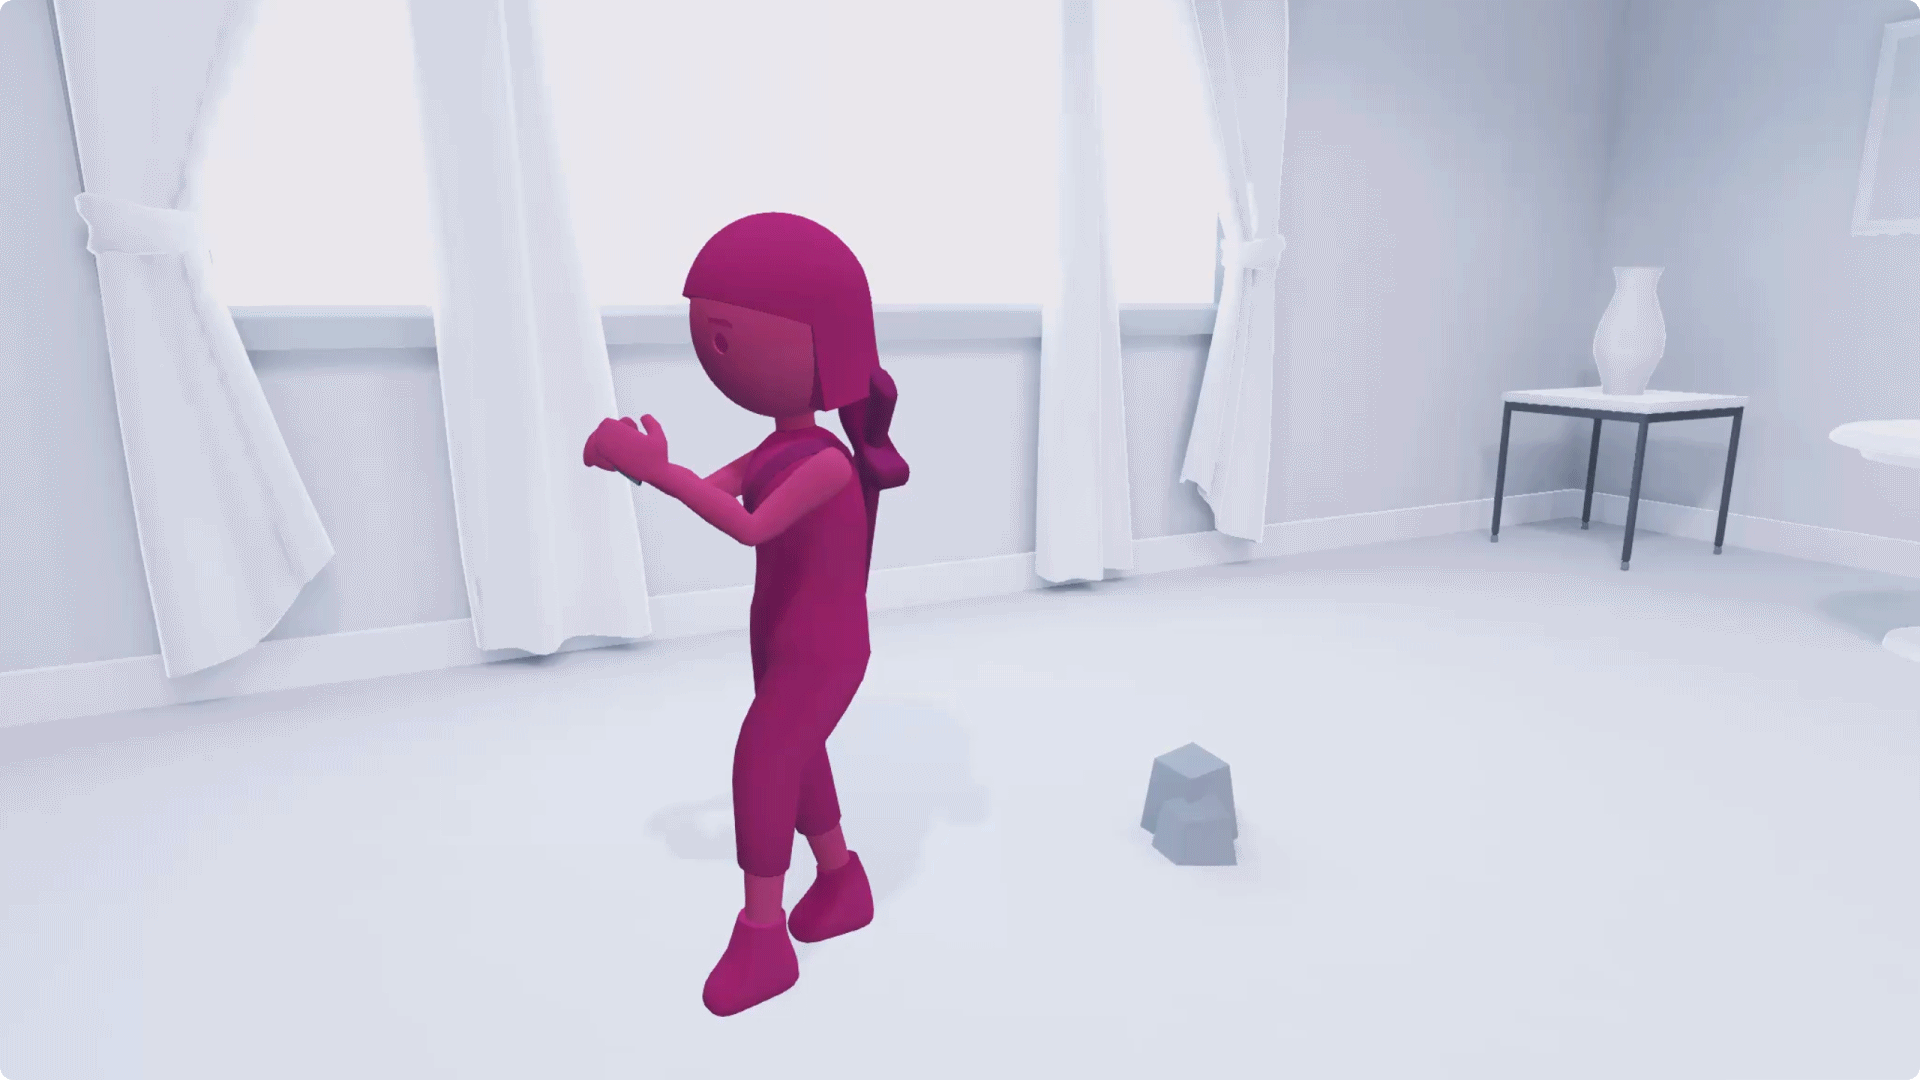 Gif depicting why a user should not have to back up when using augmented reality